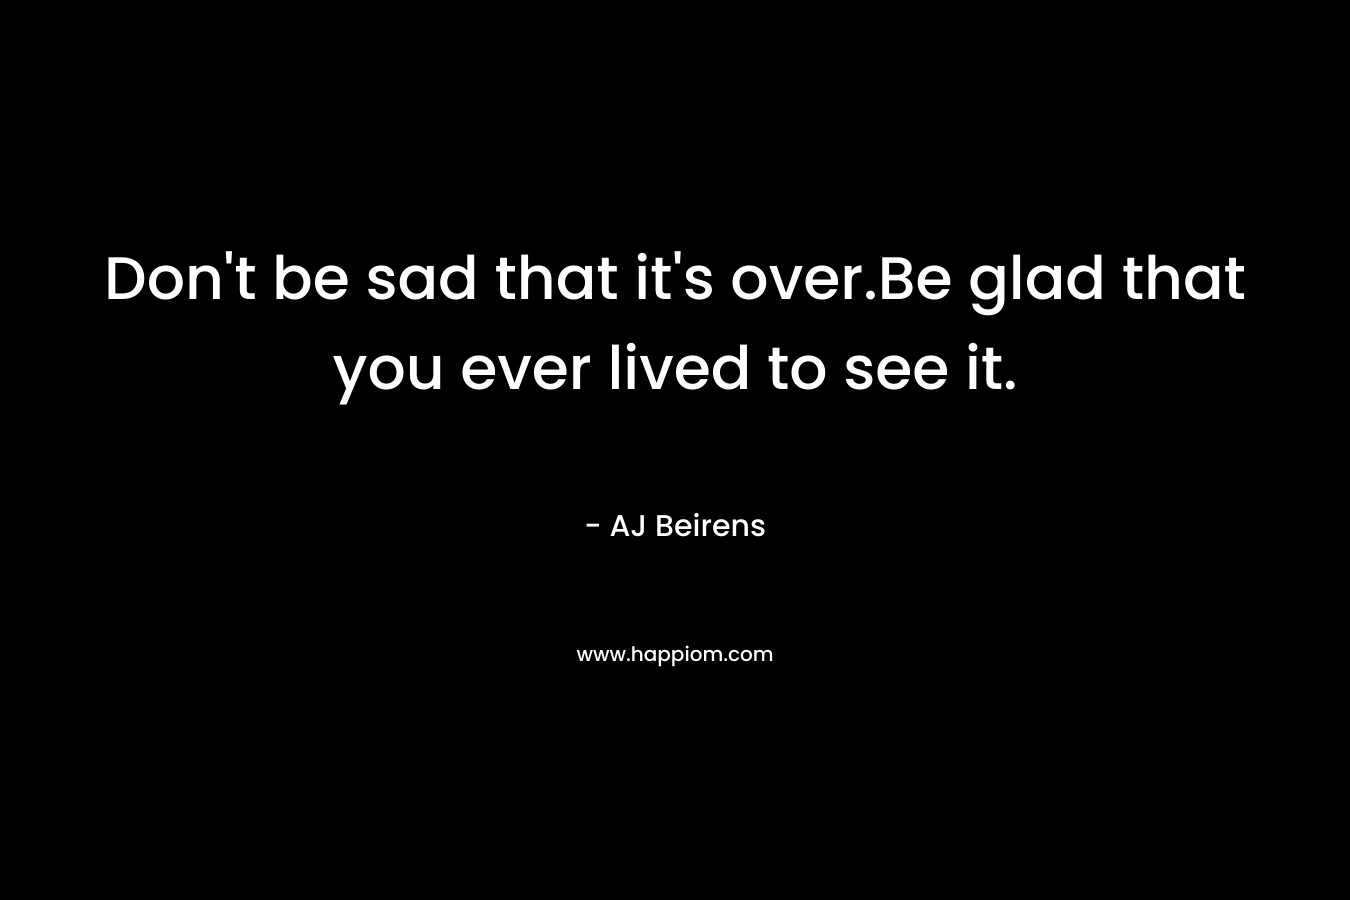 Don't be sad that it's over.Be glad that you ever lived to see it.